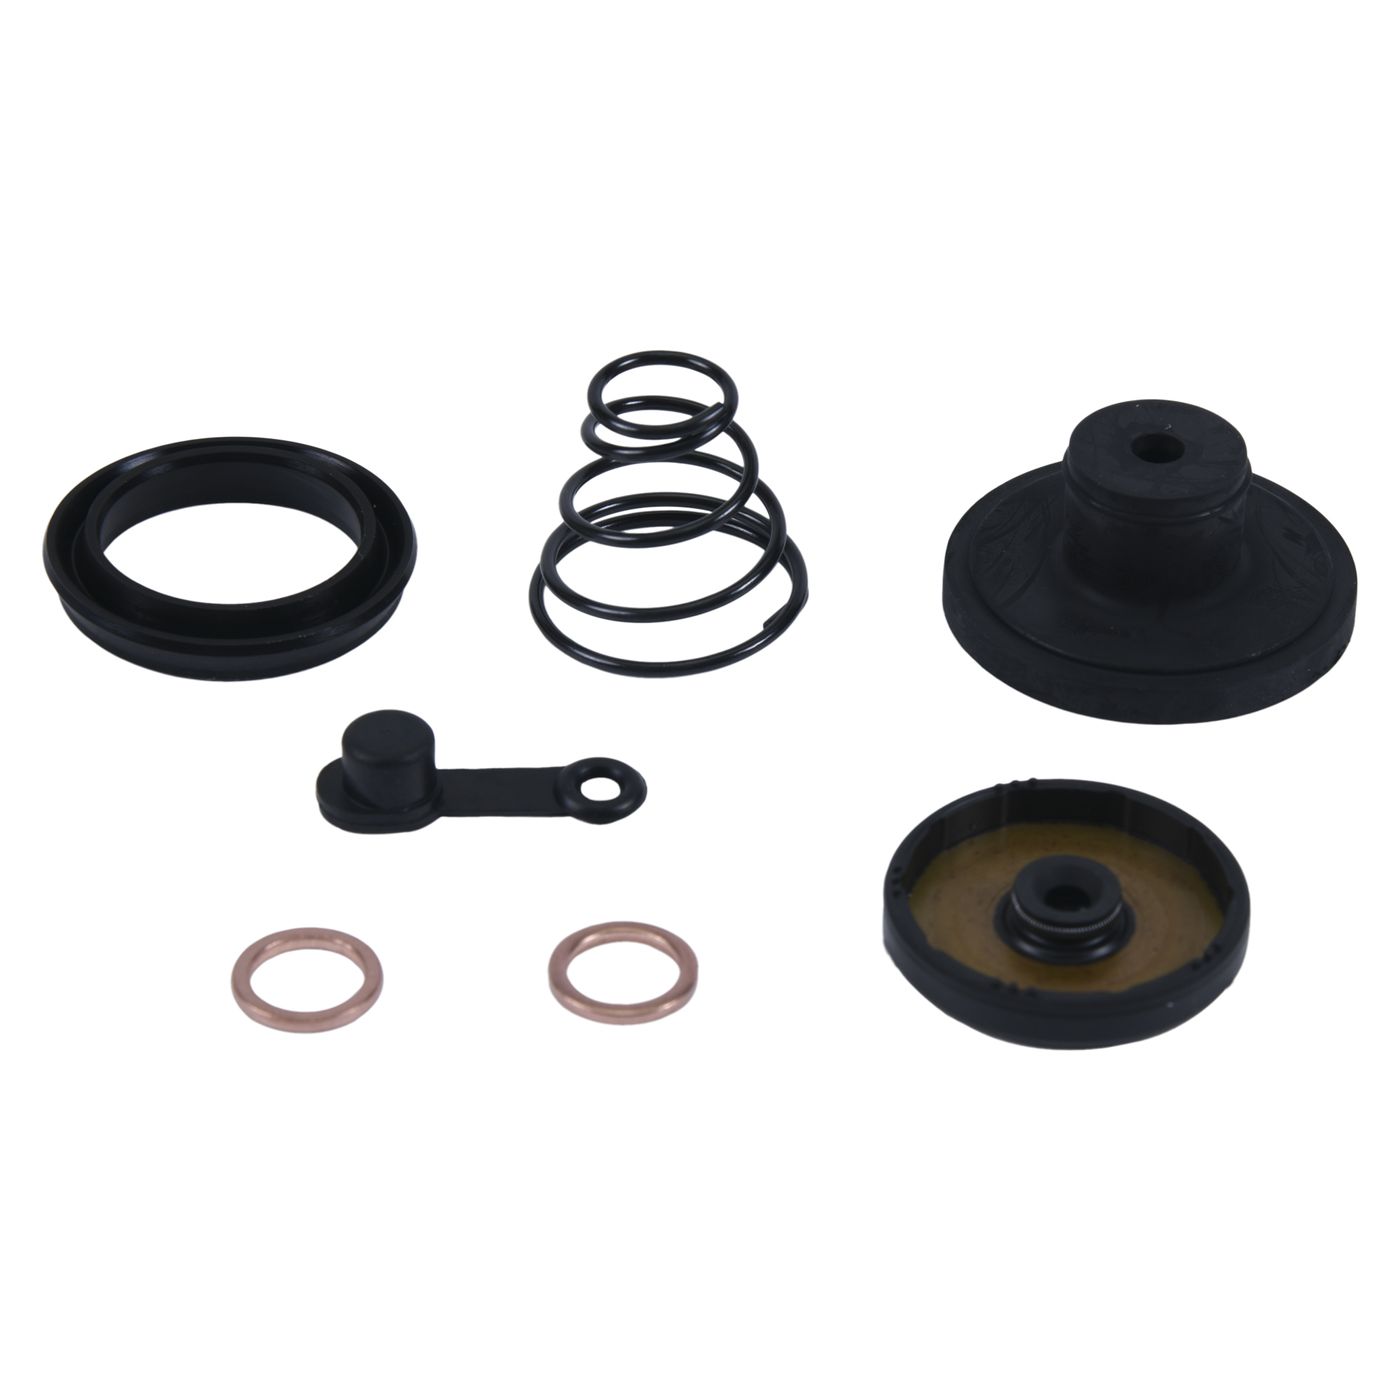 Wrp Clutch Slave Cylinder Kits - WRP186021 image